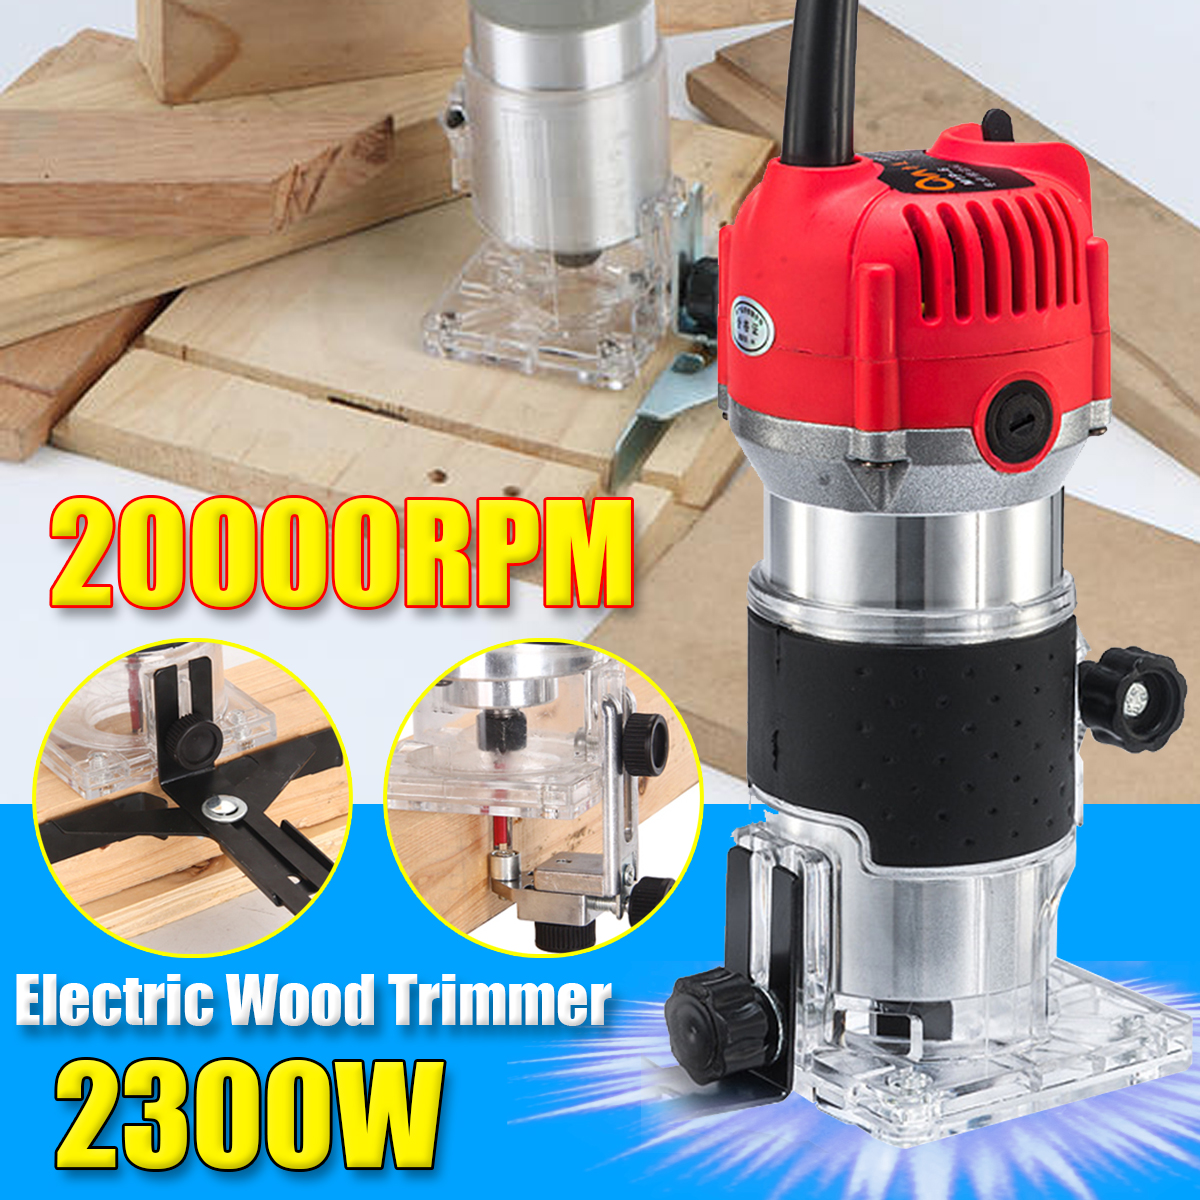 20000rpm-Electric-Hand-Trimmer-Router-Wood-Laminate-Palm-Joiners-Working-Cutting-Tool-1830153-1